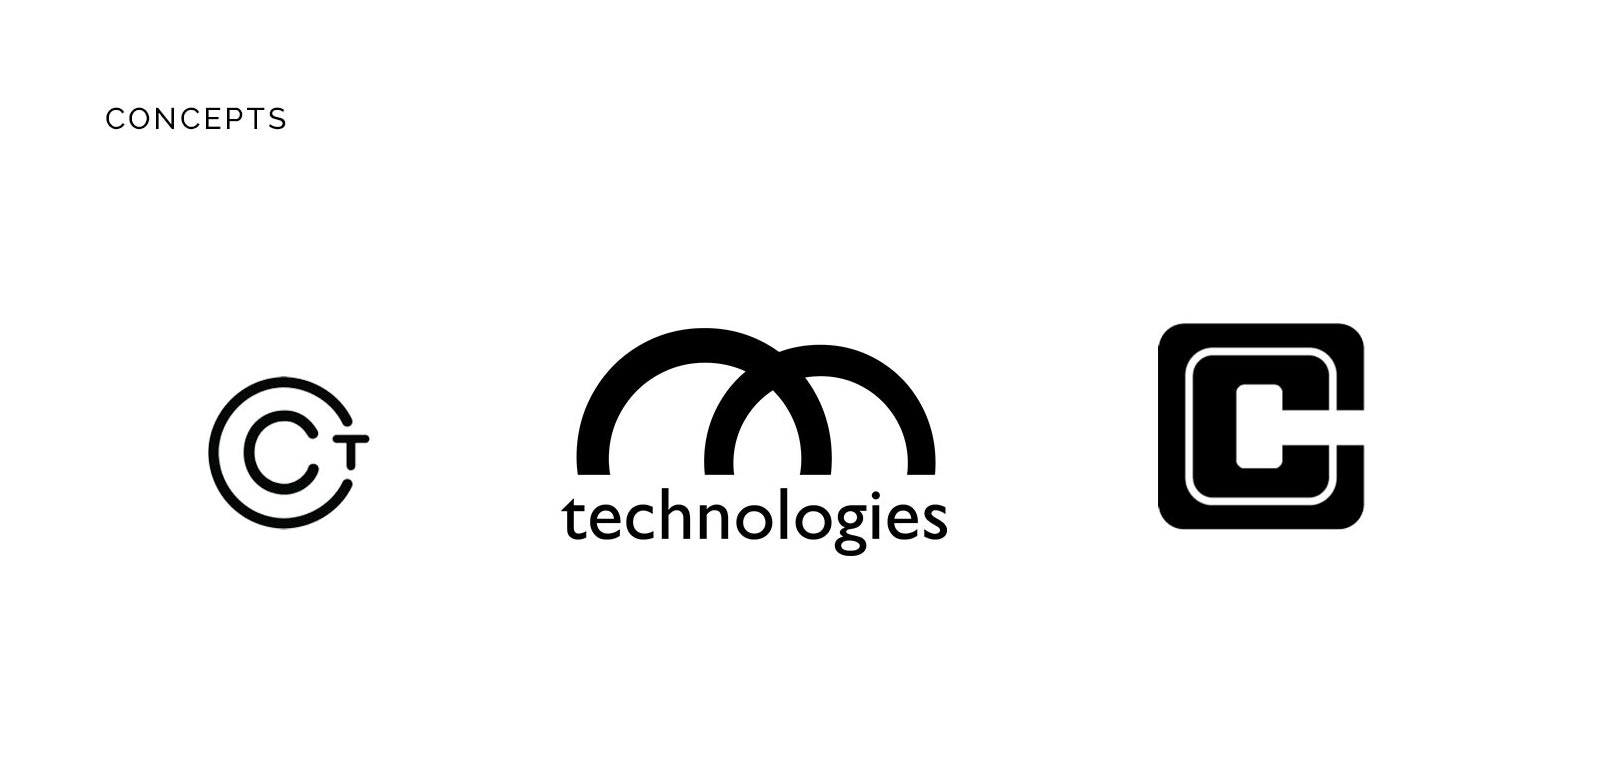 Concepts for the new cutting chai tech logo